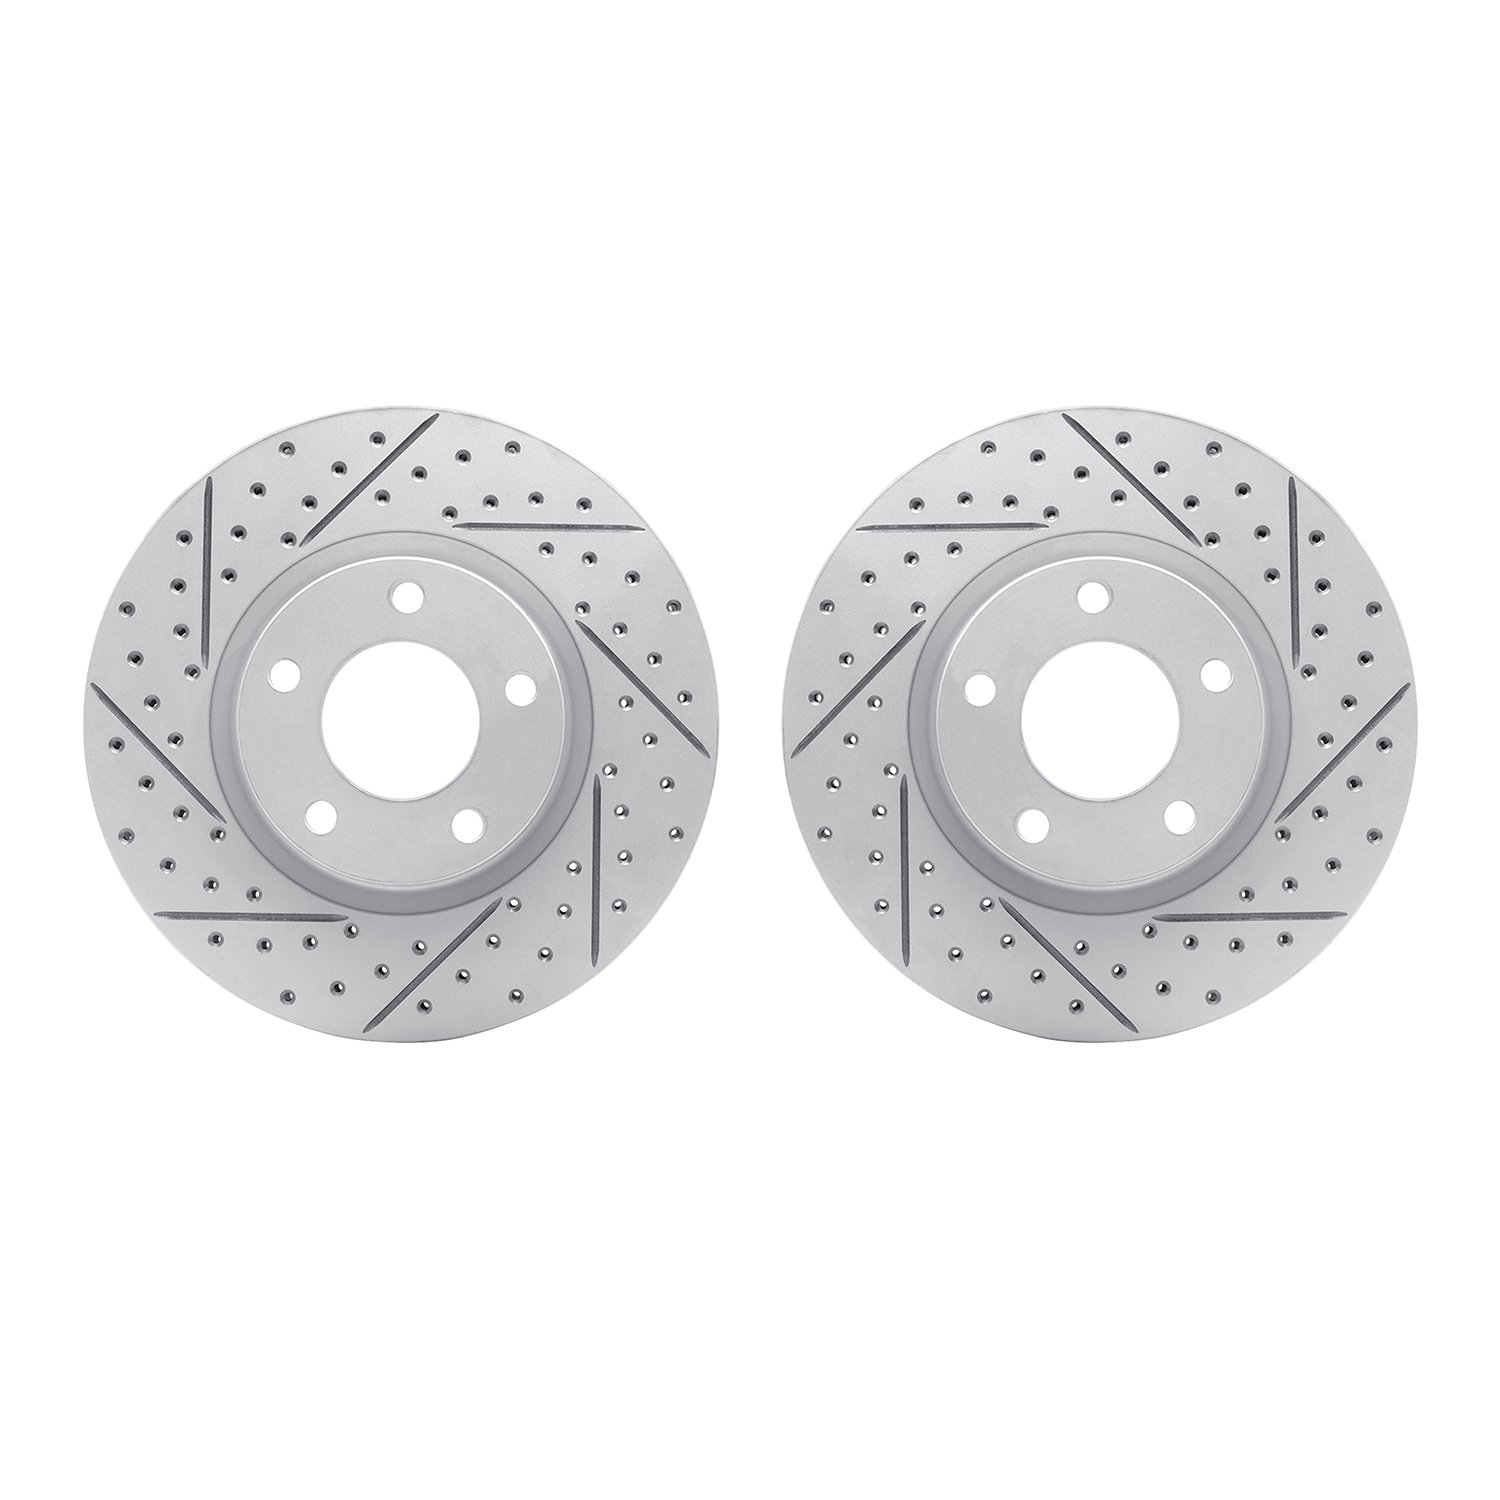 2002-80005 Geoperformance Drilled/Slotted Brake Rotors, 2004-2015 Ford/Lincoln/Mercury/Mazda, Position: Front